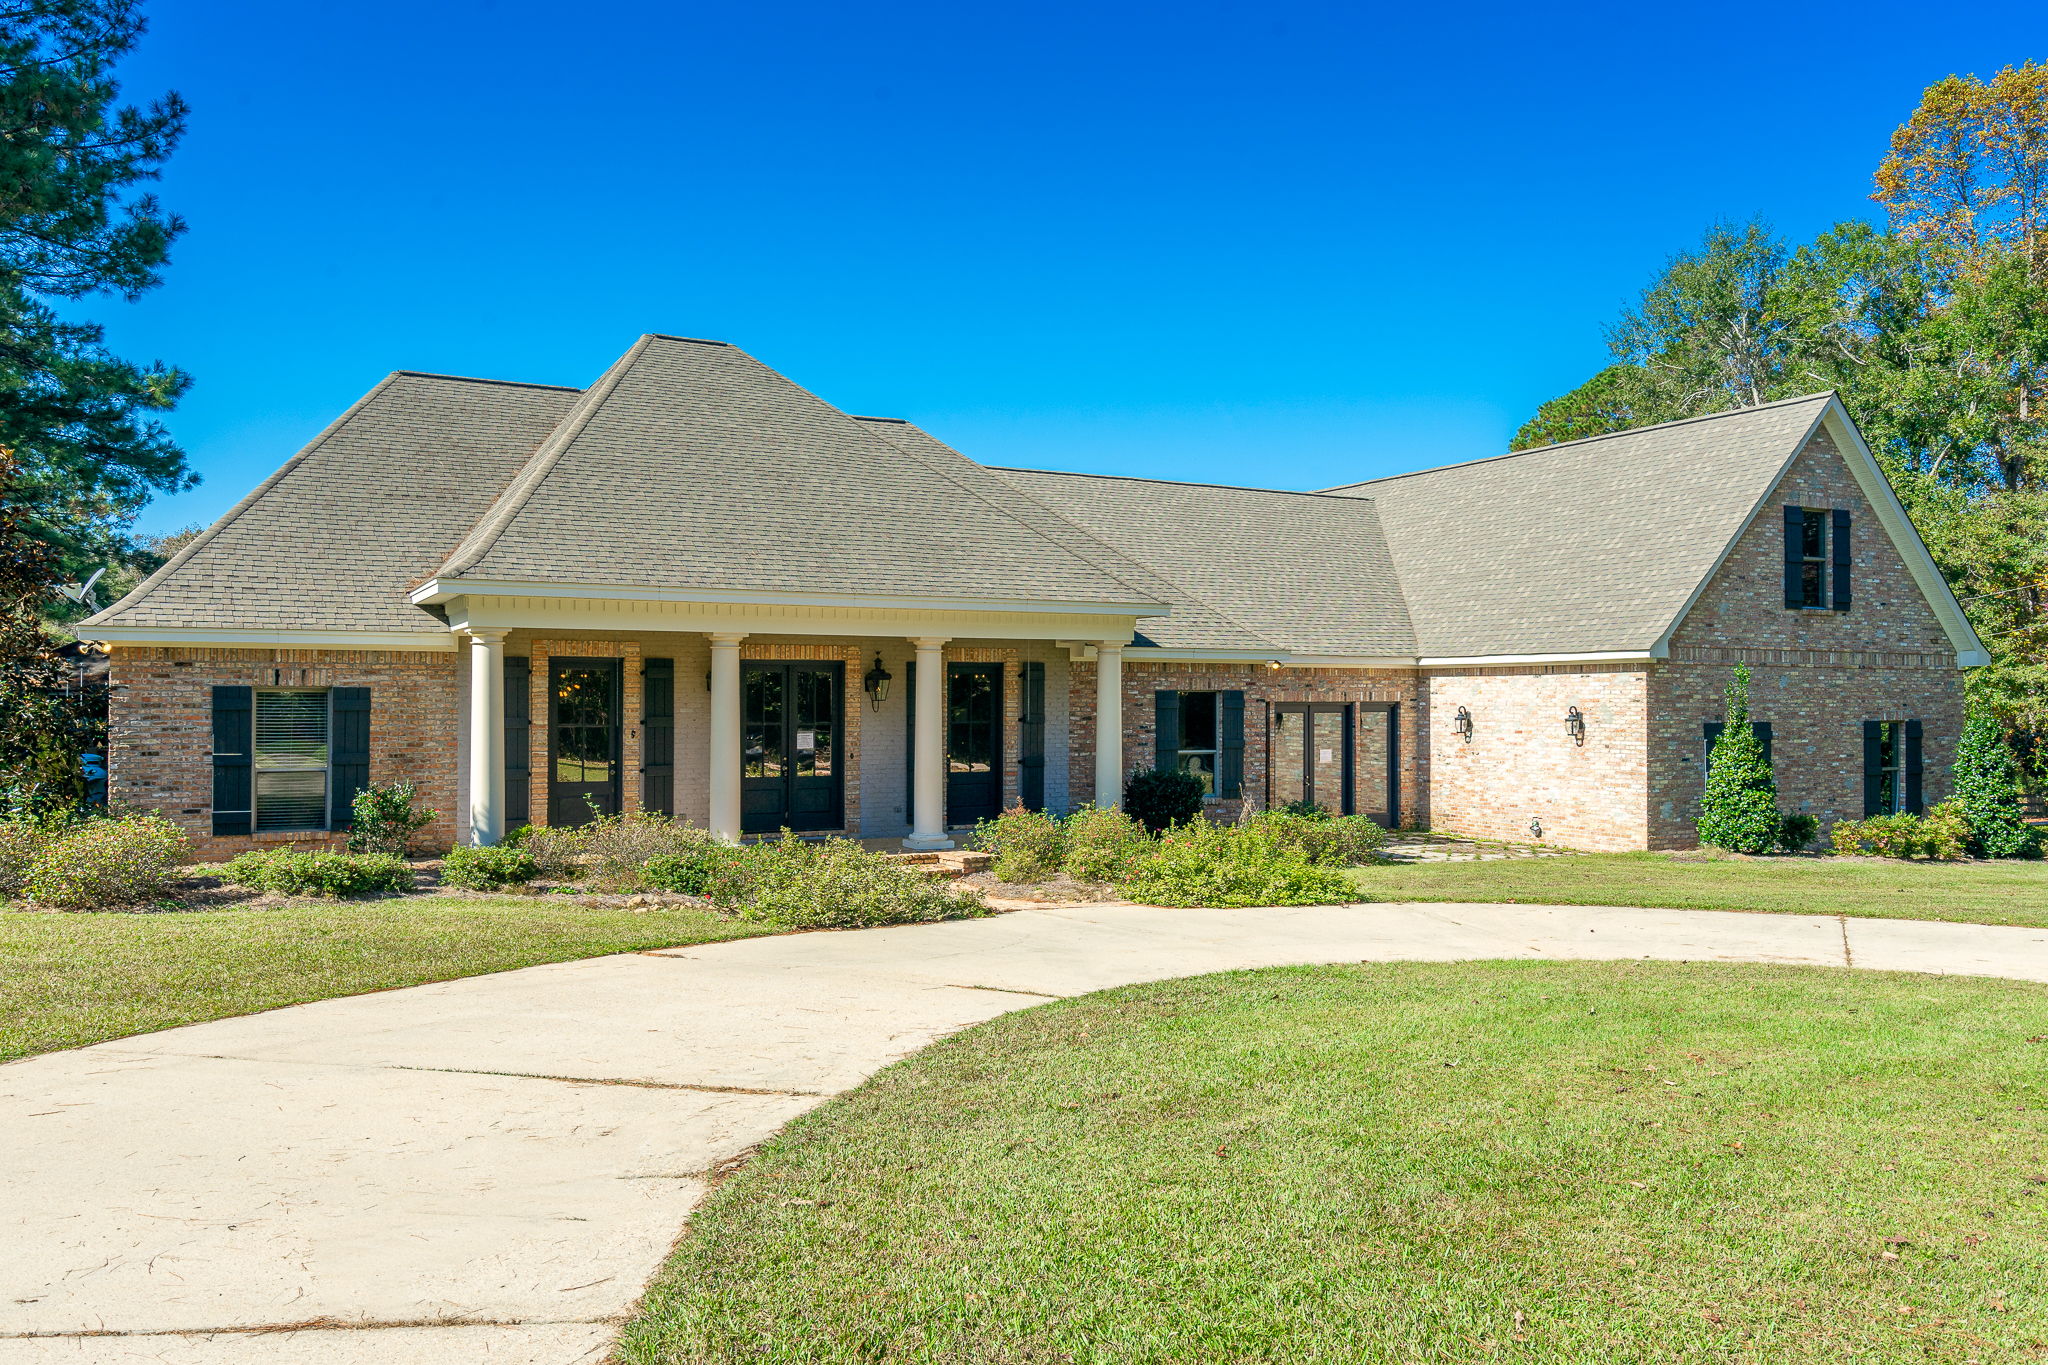  123 Higgins Rd, Sumrall, MS 39482, US